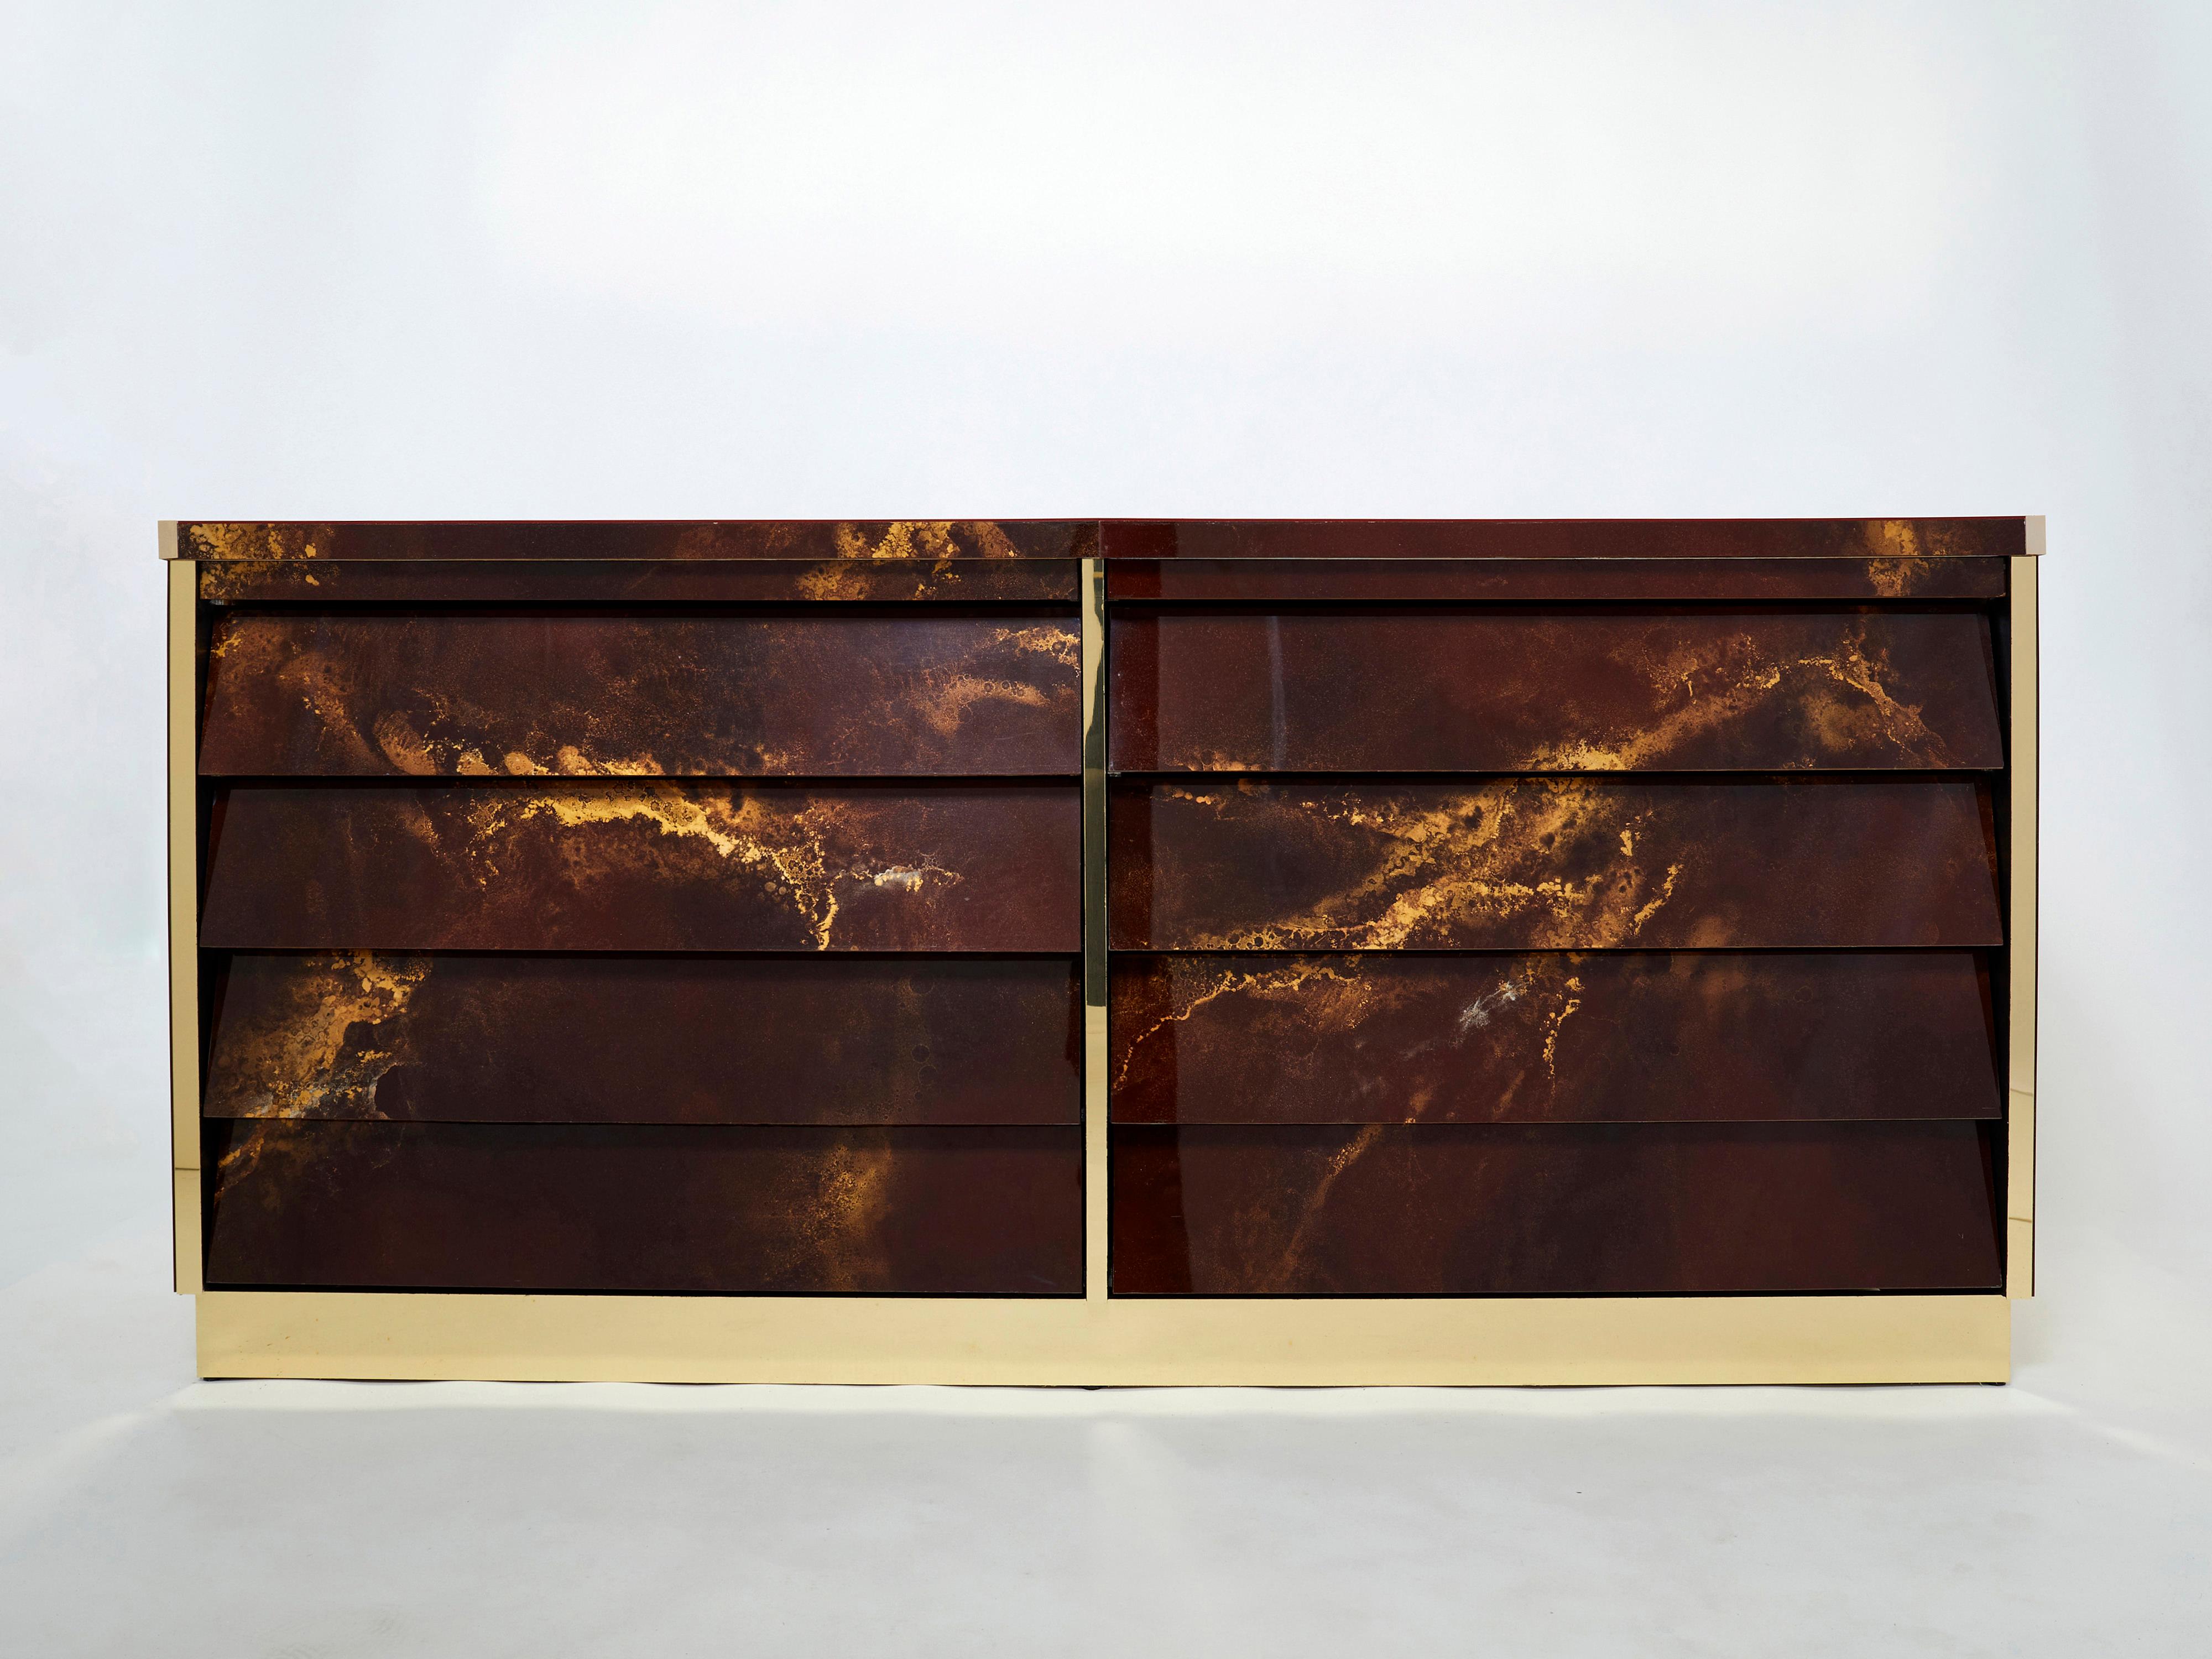 An exciting example of French design firm Maison Jansen’s commissioned pieces. This large sideboard is made from solid oak, lacquered in a rich dark brown and bronze–golden finish. The resulting effect is a beautiful mottling of color around the